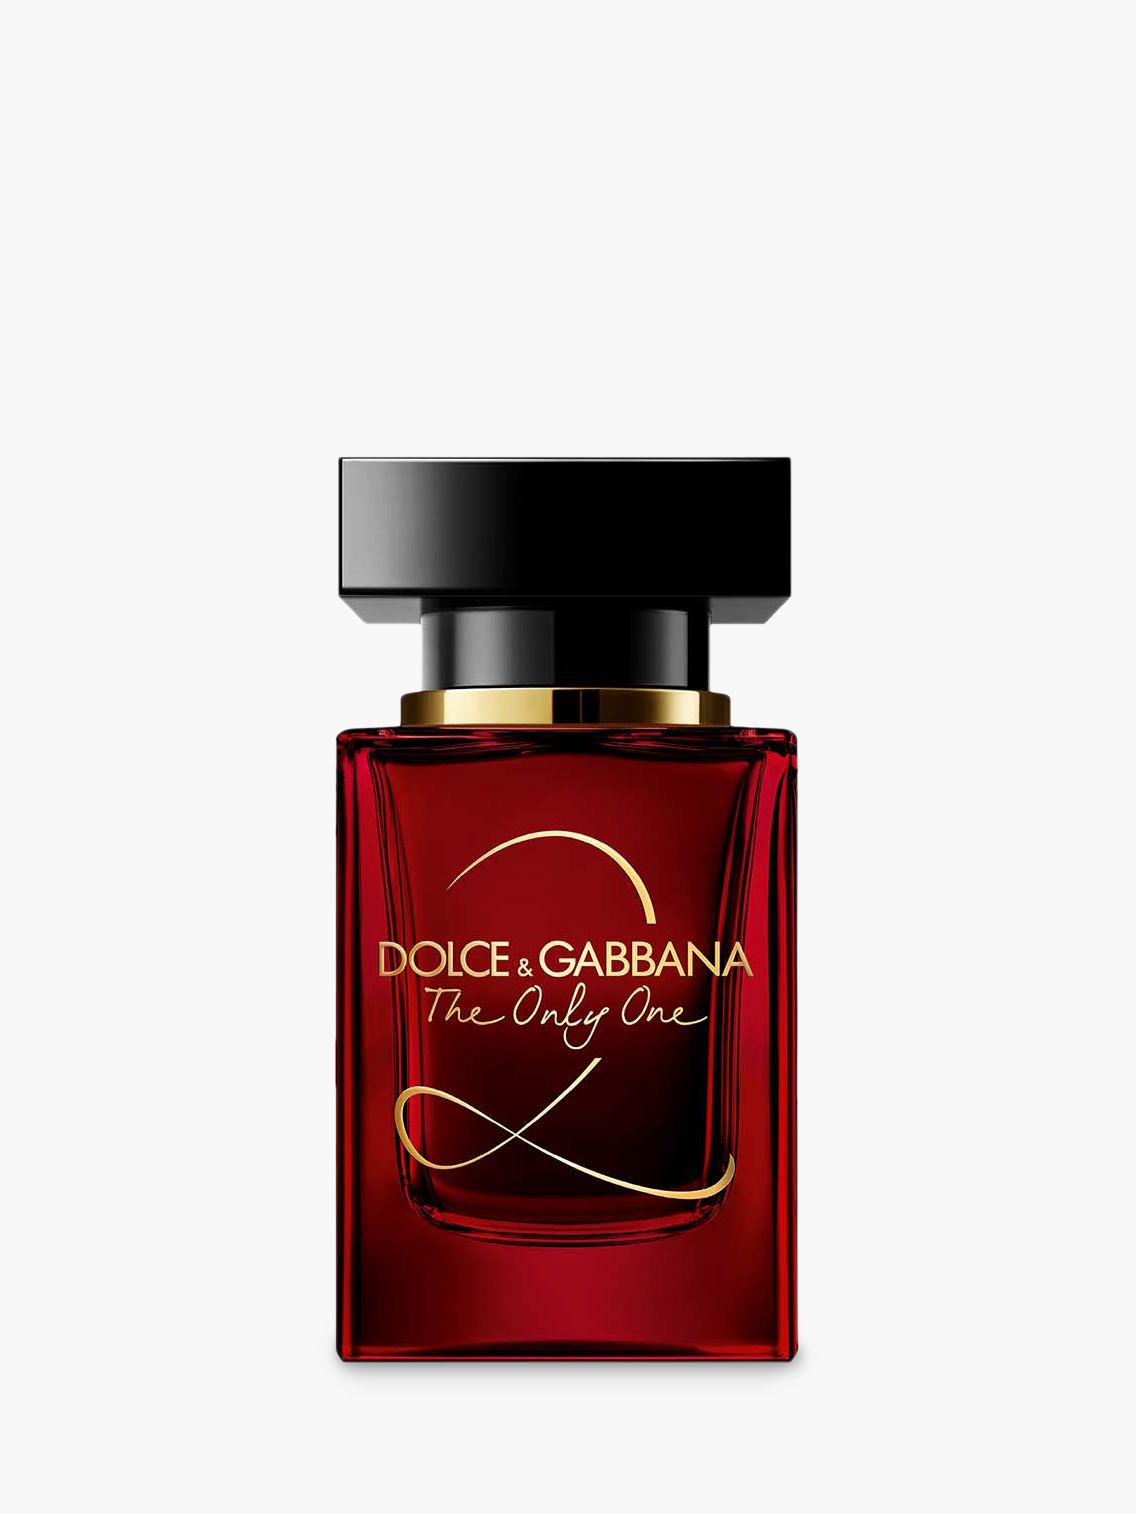 dolce and gabbana perfume red bottle